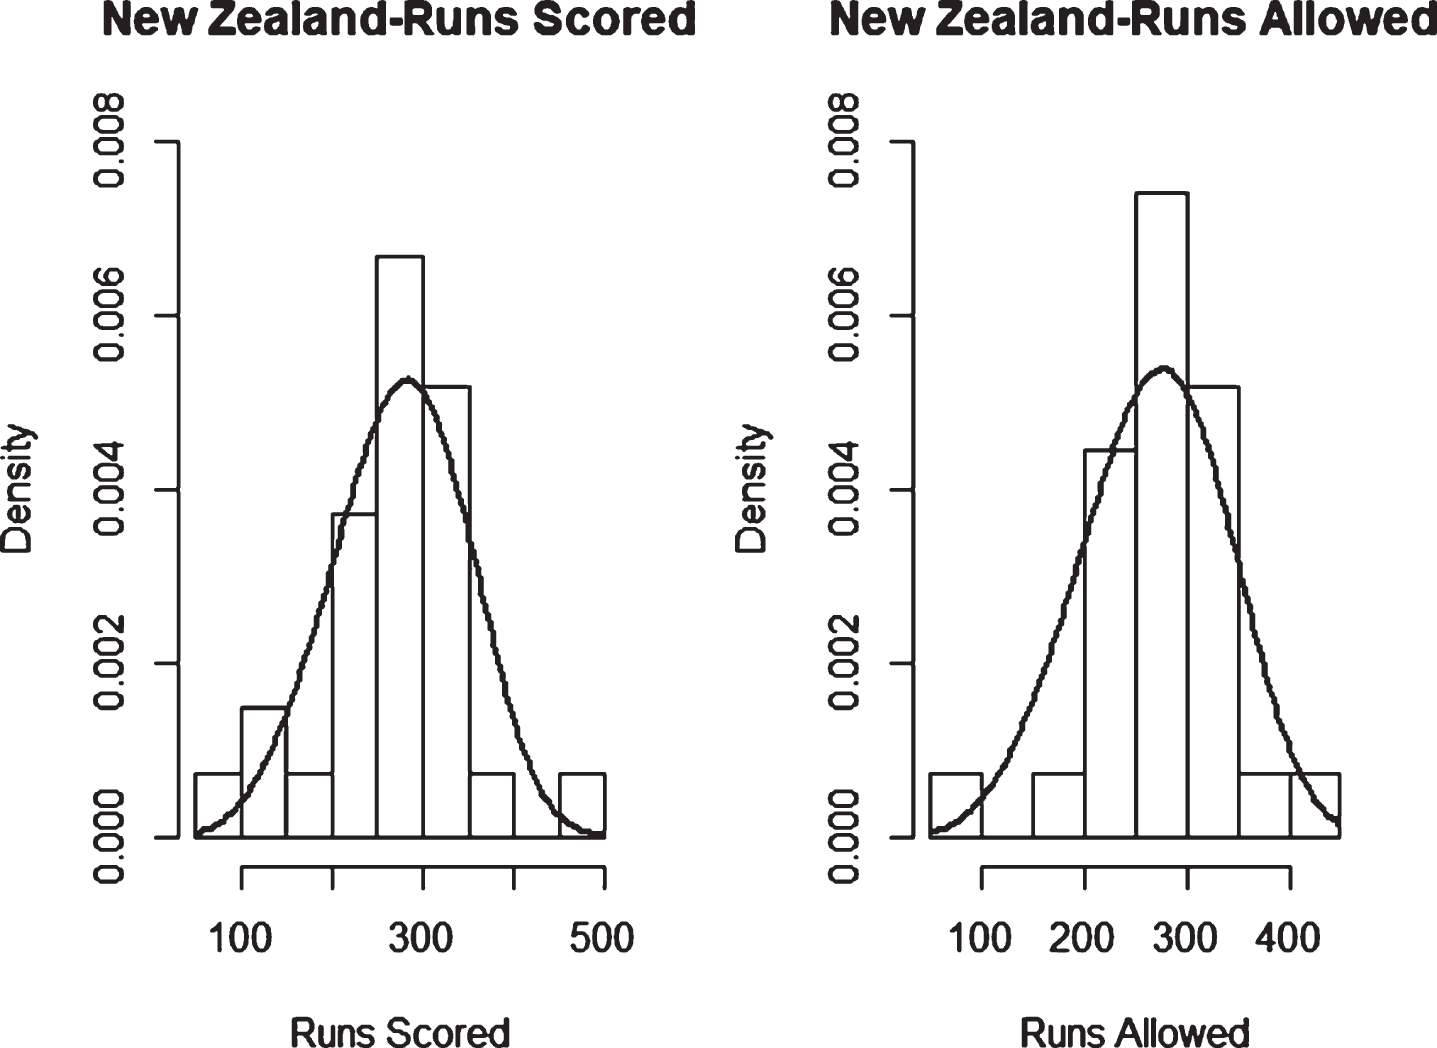 Weibull Distribution Fit for Runs Scored and Runs Allowed for New Zealand using Least Squares Method (ODI).